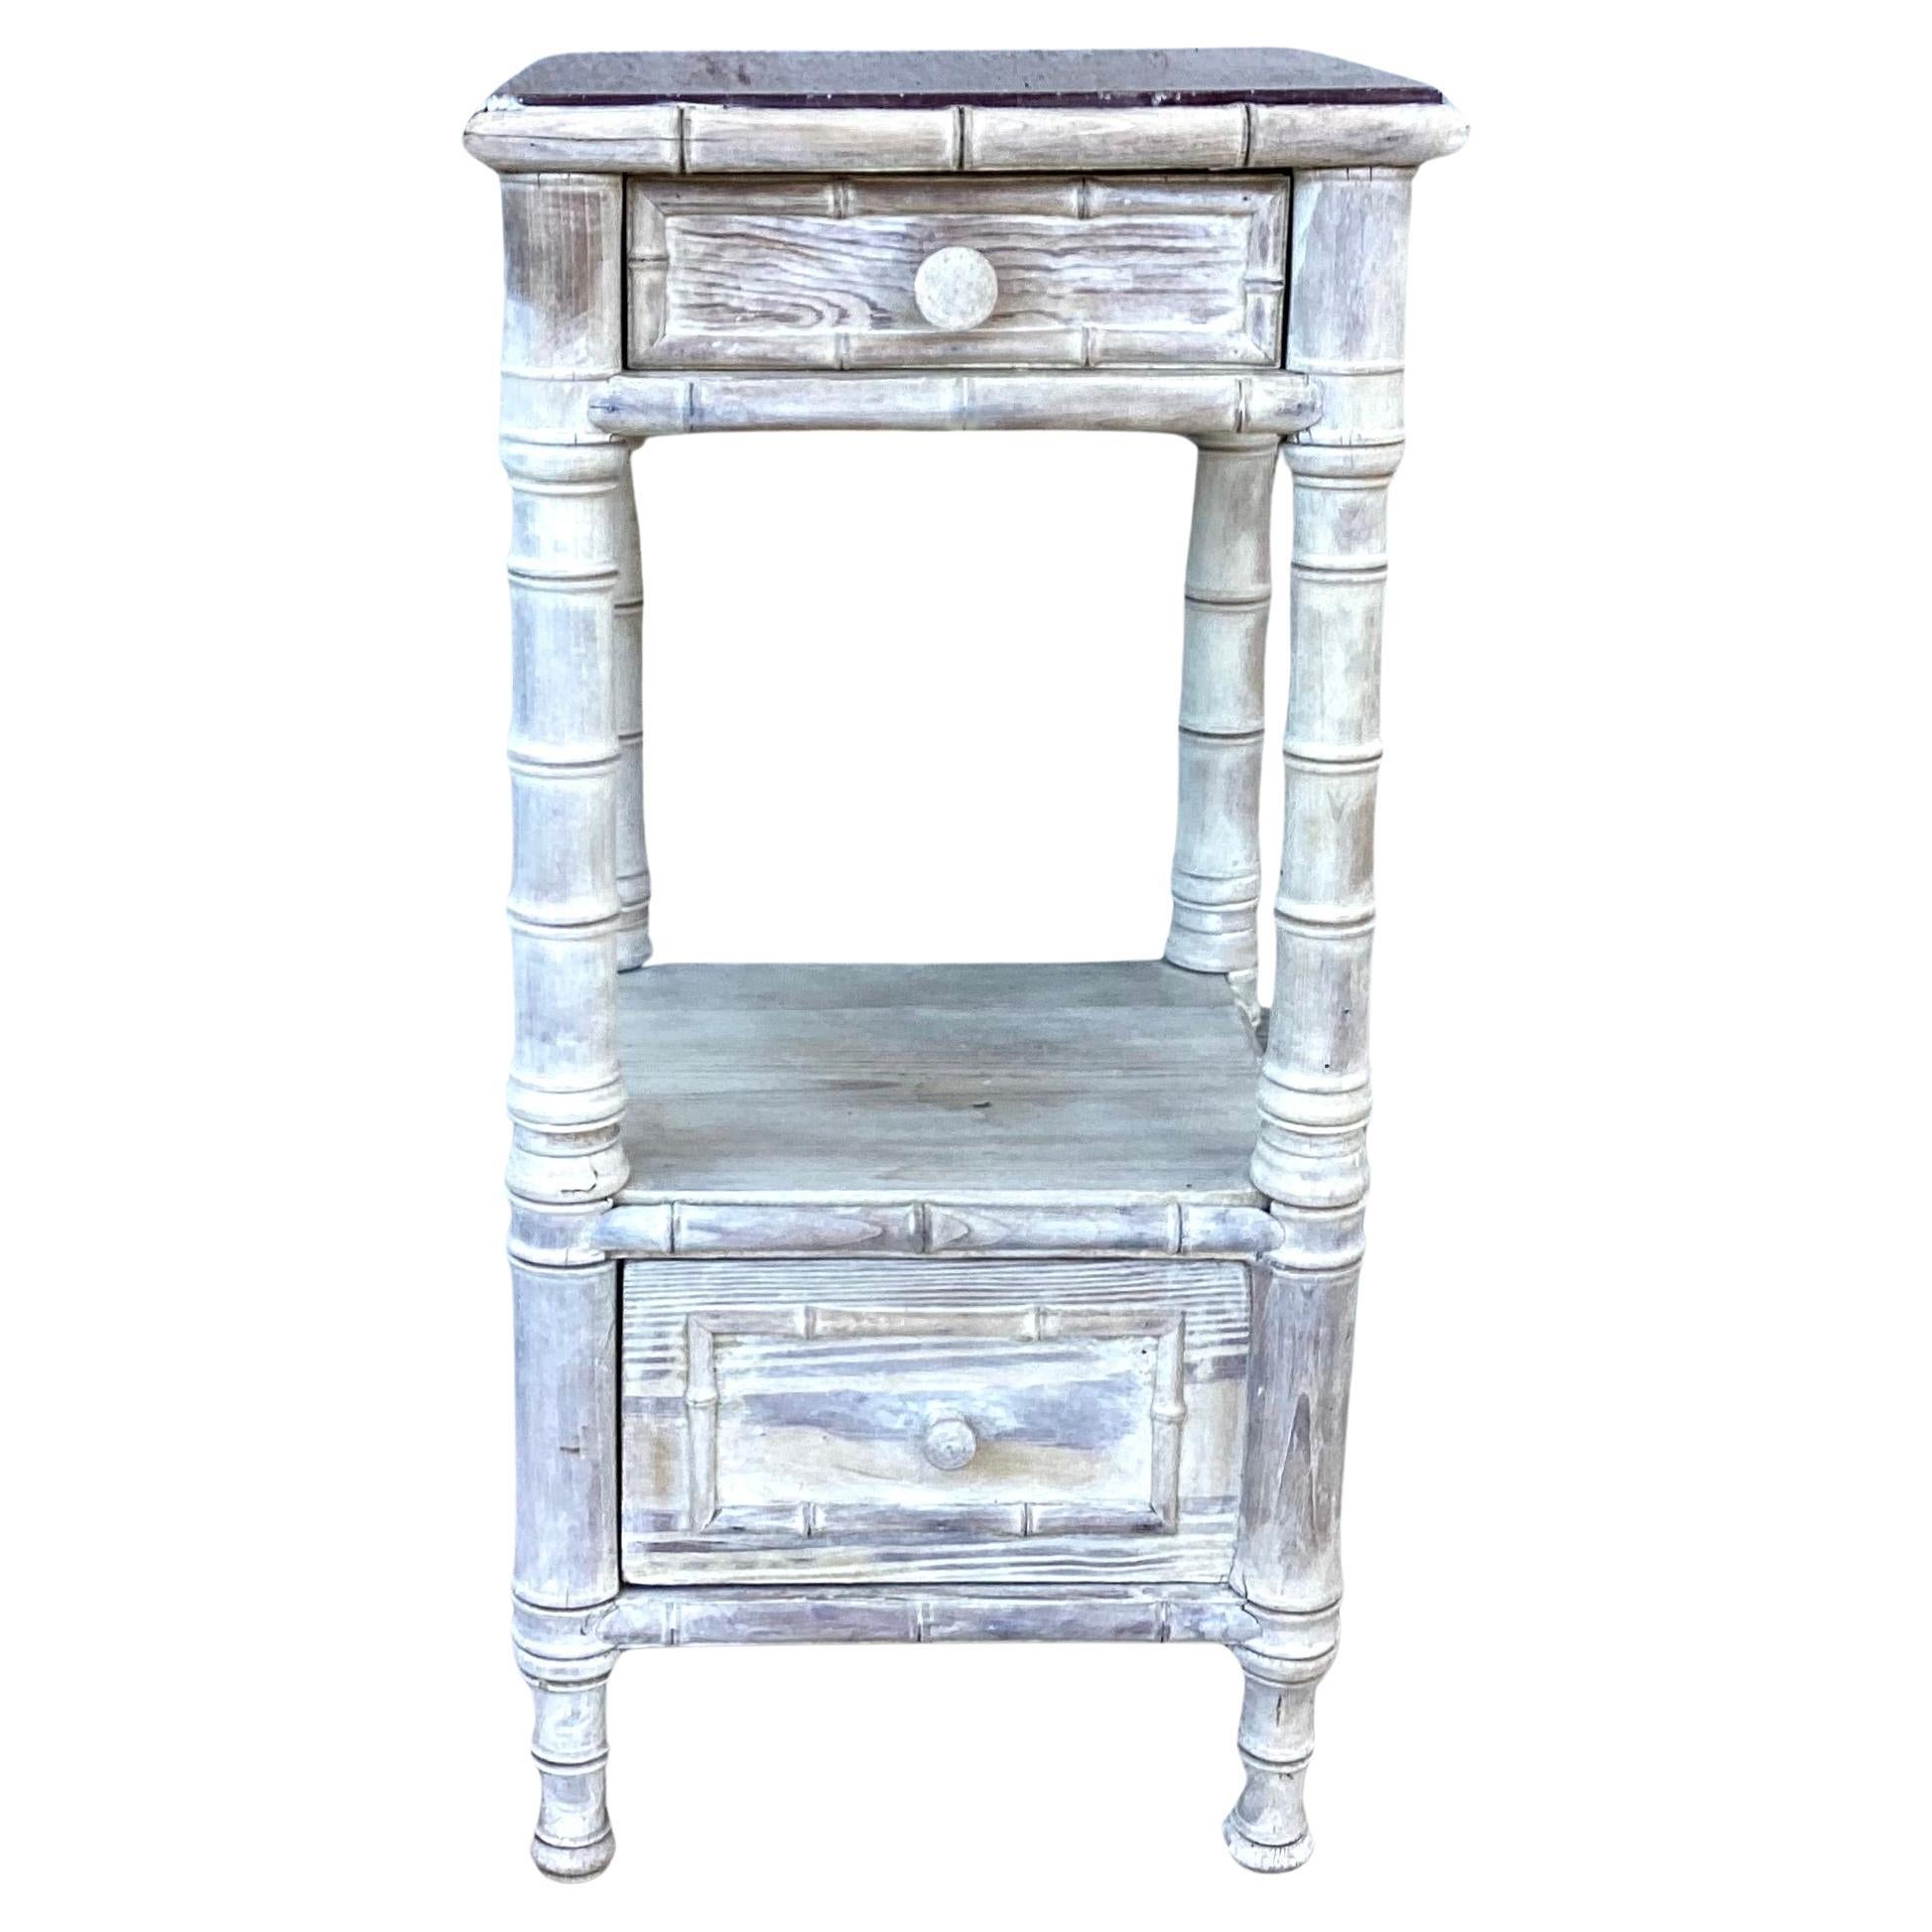 Charming vintage faux bamboo nightstand or side table with brown marble top. Table features a top drawer and a bottom shelf with door opening, and four turned post legs for support. Has a washed distressed finish for a well-worn patina to add to the